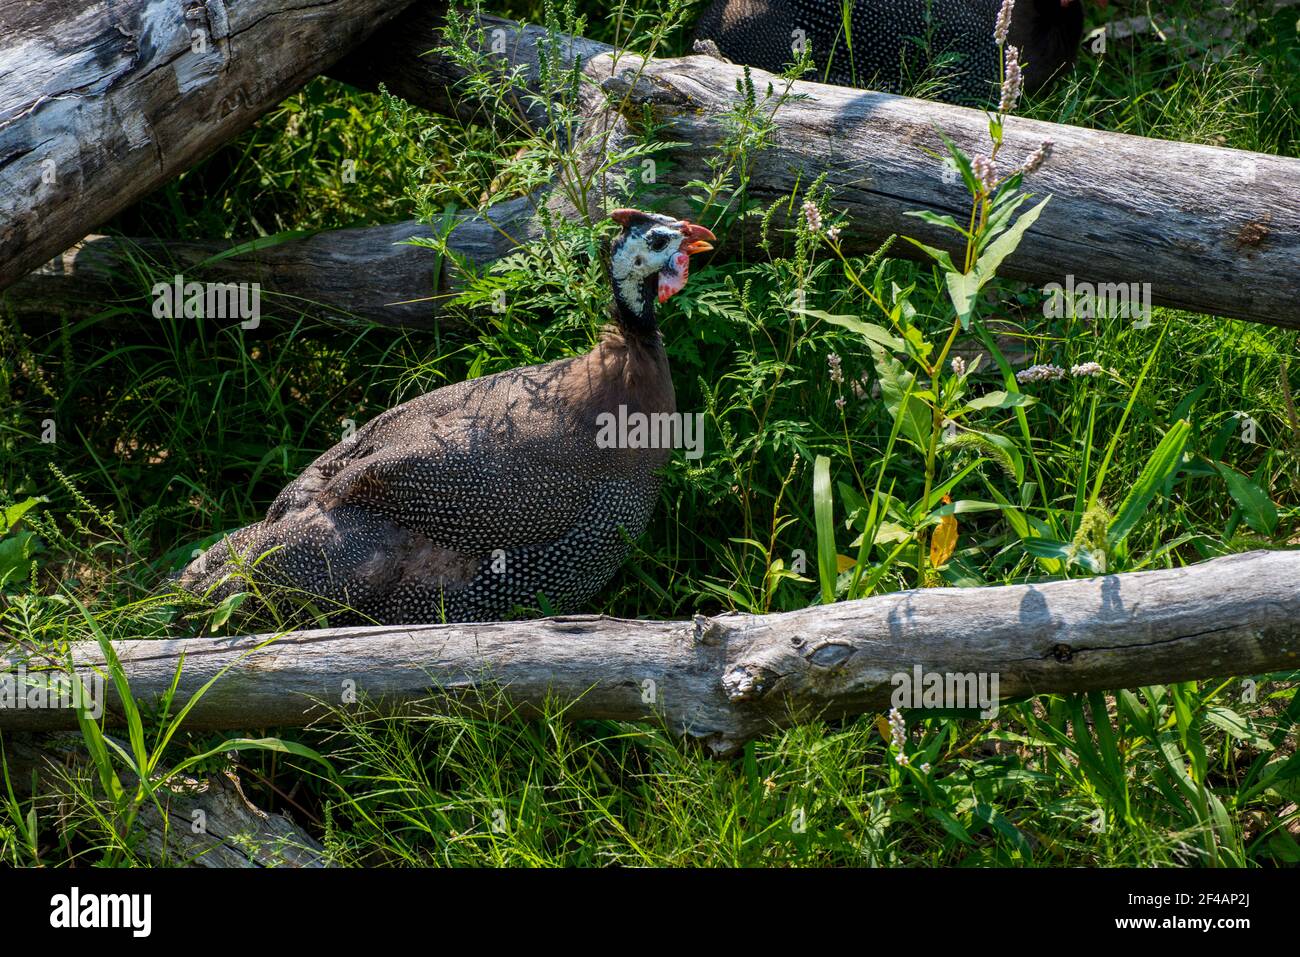 Apple Valley, Minnesota.  A Helmeted Guineafowl, Numida meleagris walking in the grass. Stock Photo